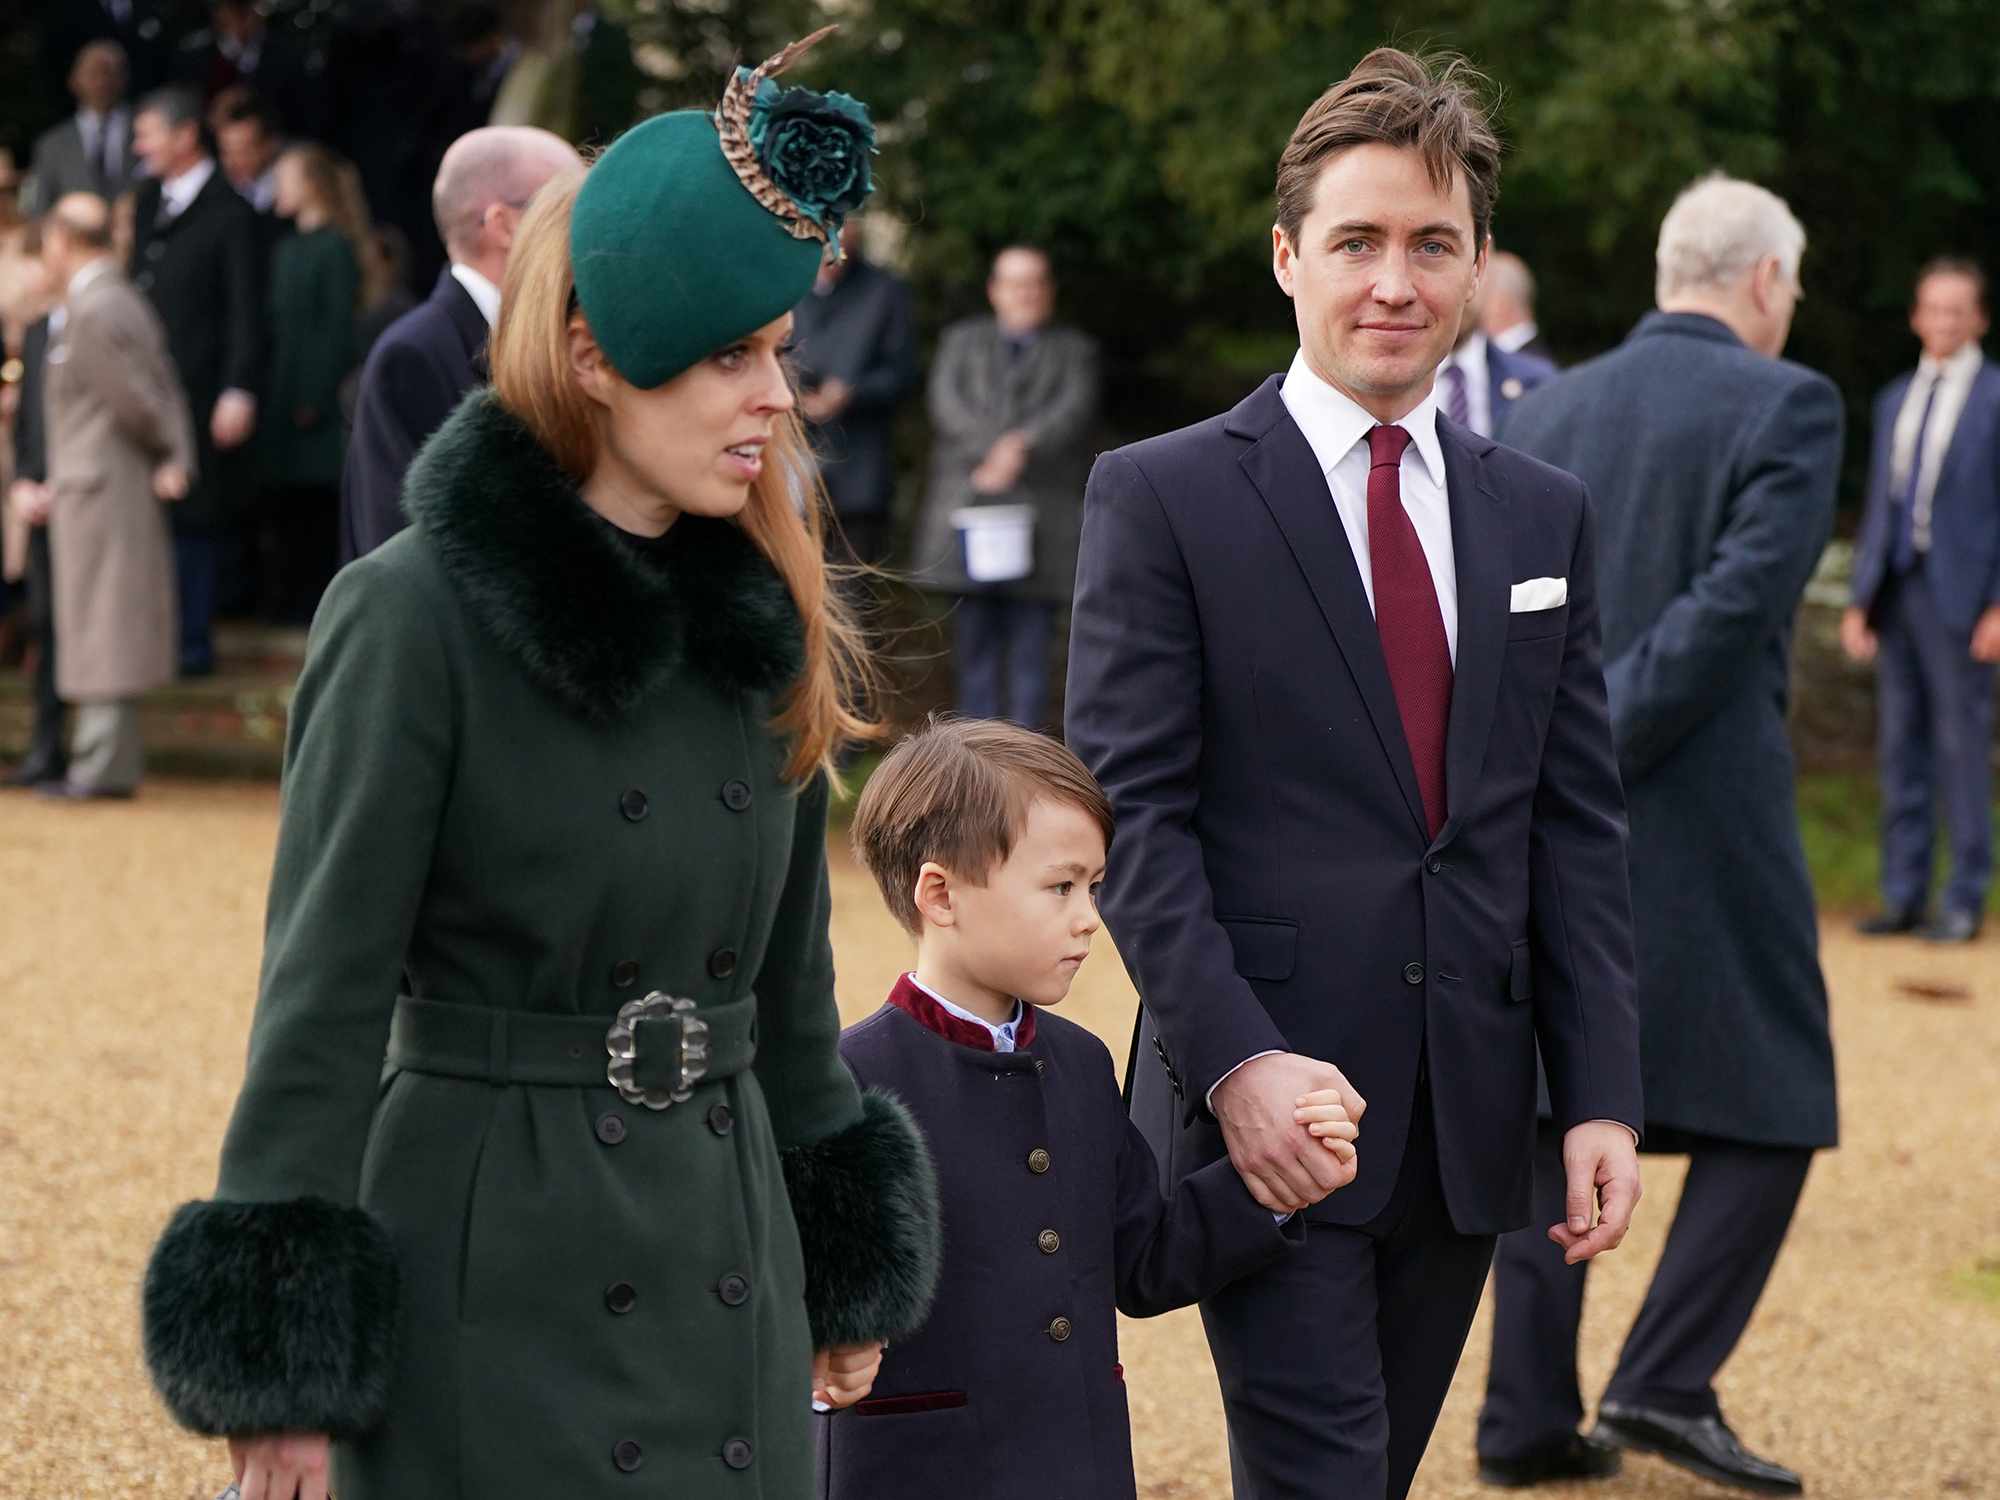 Princess Beatrice, Edoardo Mapelli Mozzi and his son Christopher Woolf attending the Christmas Day morning church service at St Mary Magdalene Church in Sandringham, Norfolk